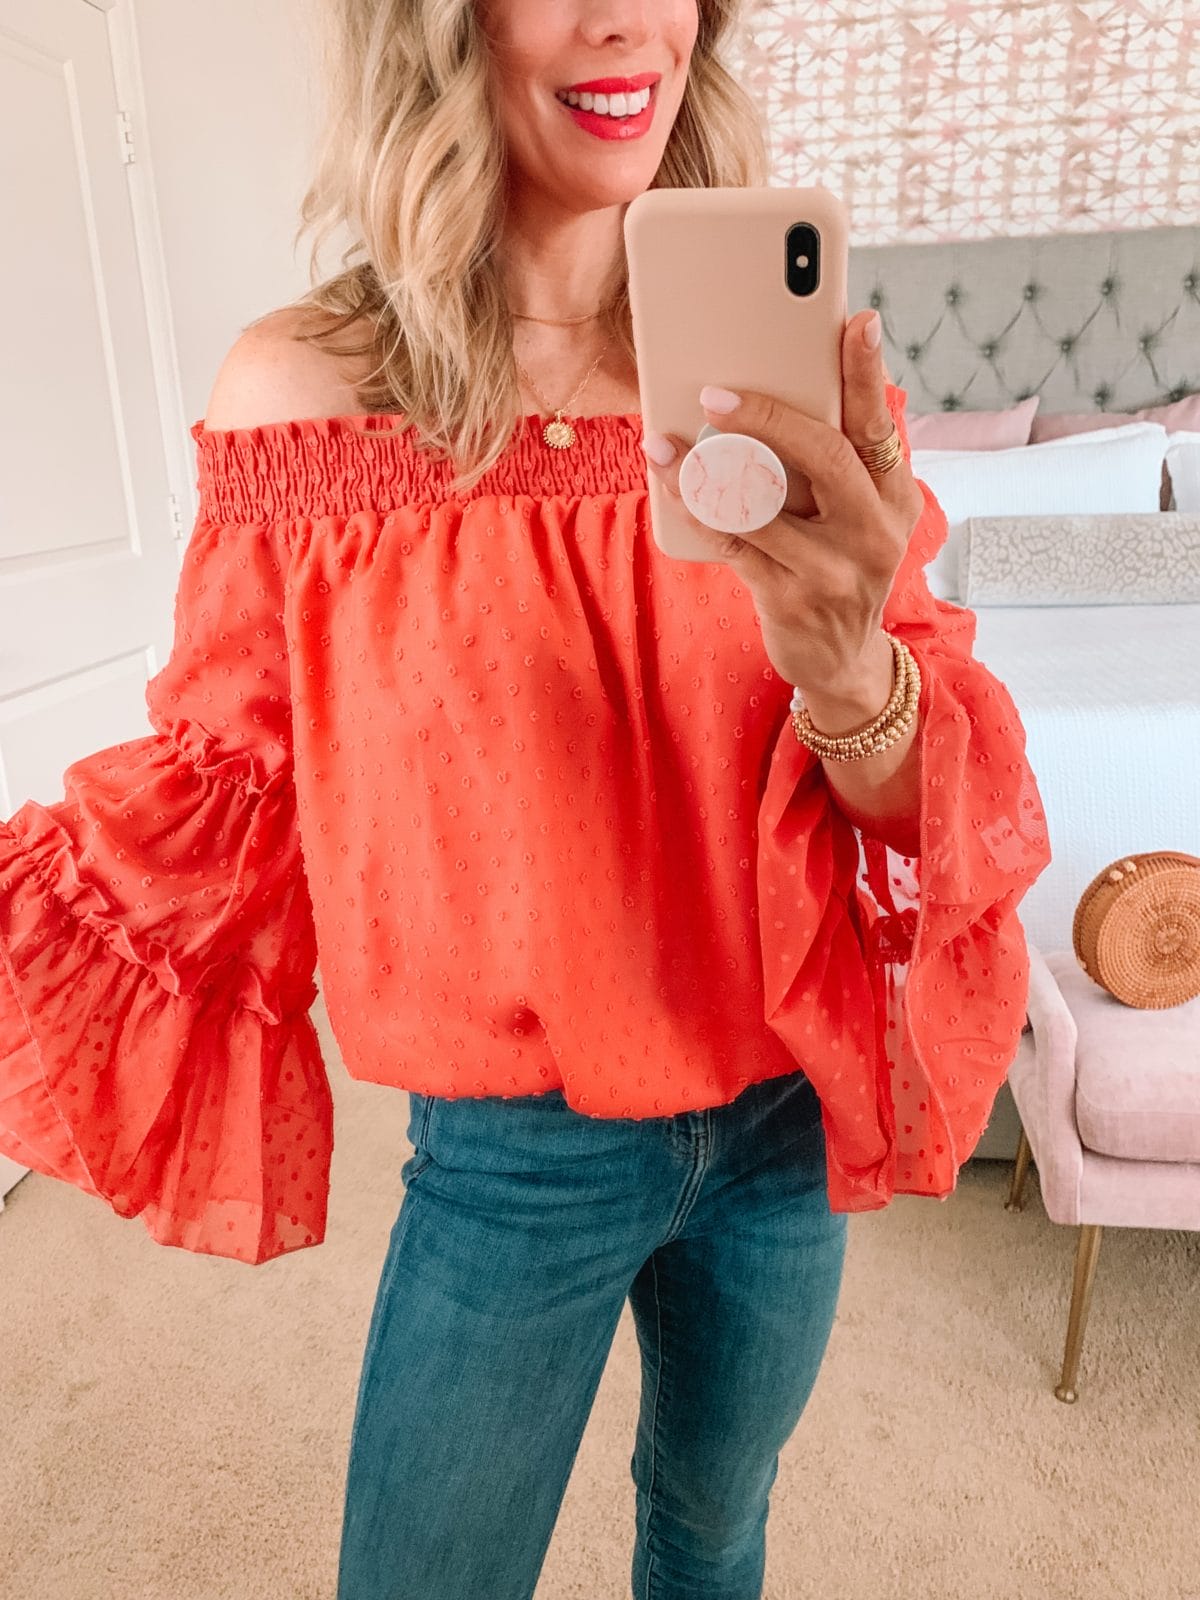 Amazon Fashion Faves, Clip Dot Off the Shoulder Top and Jeans, Sandals